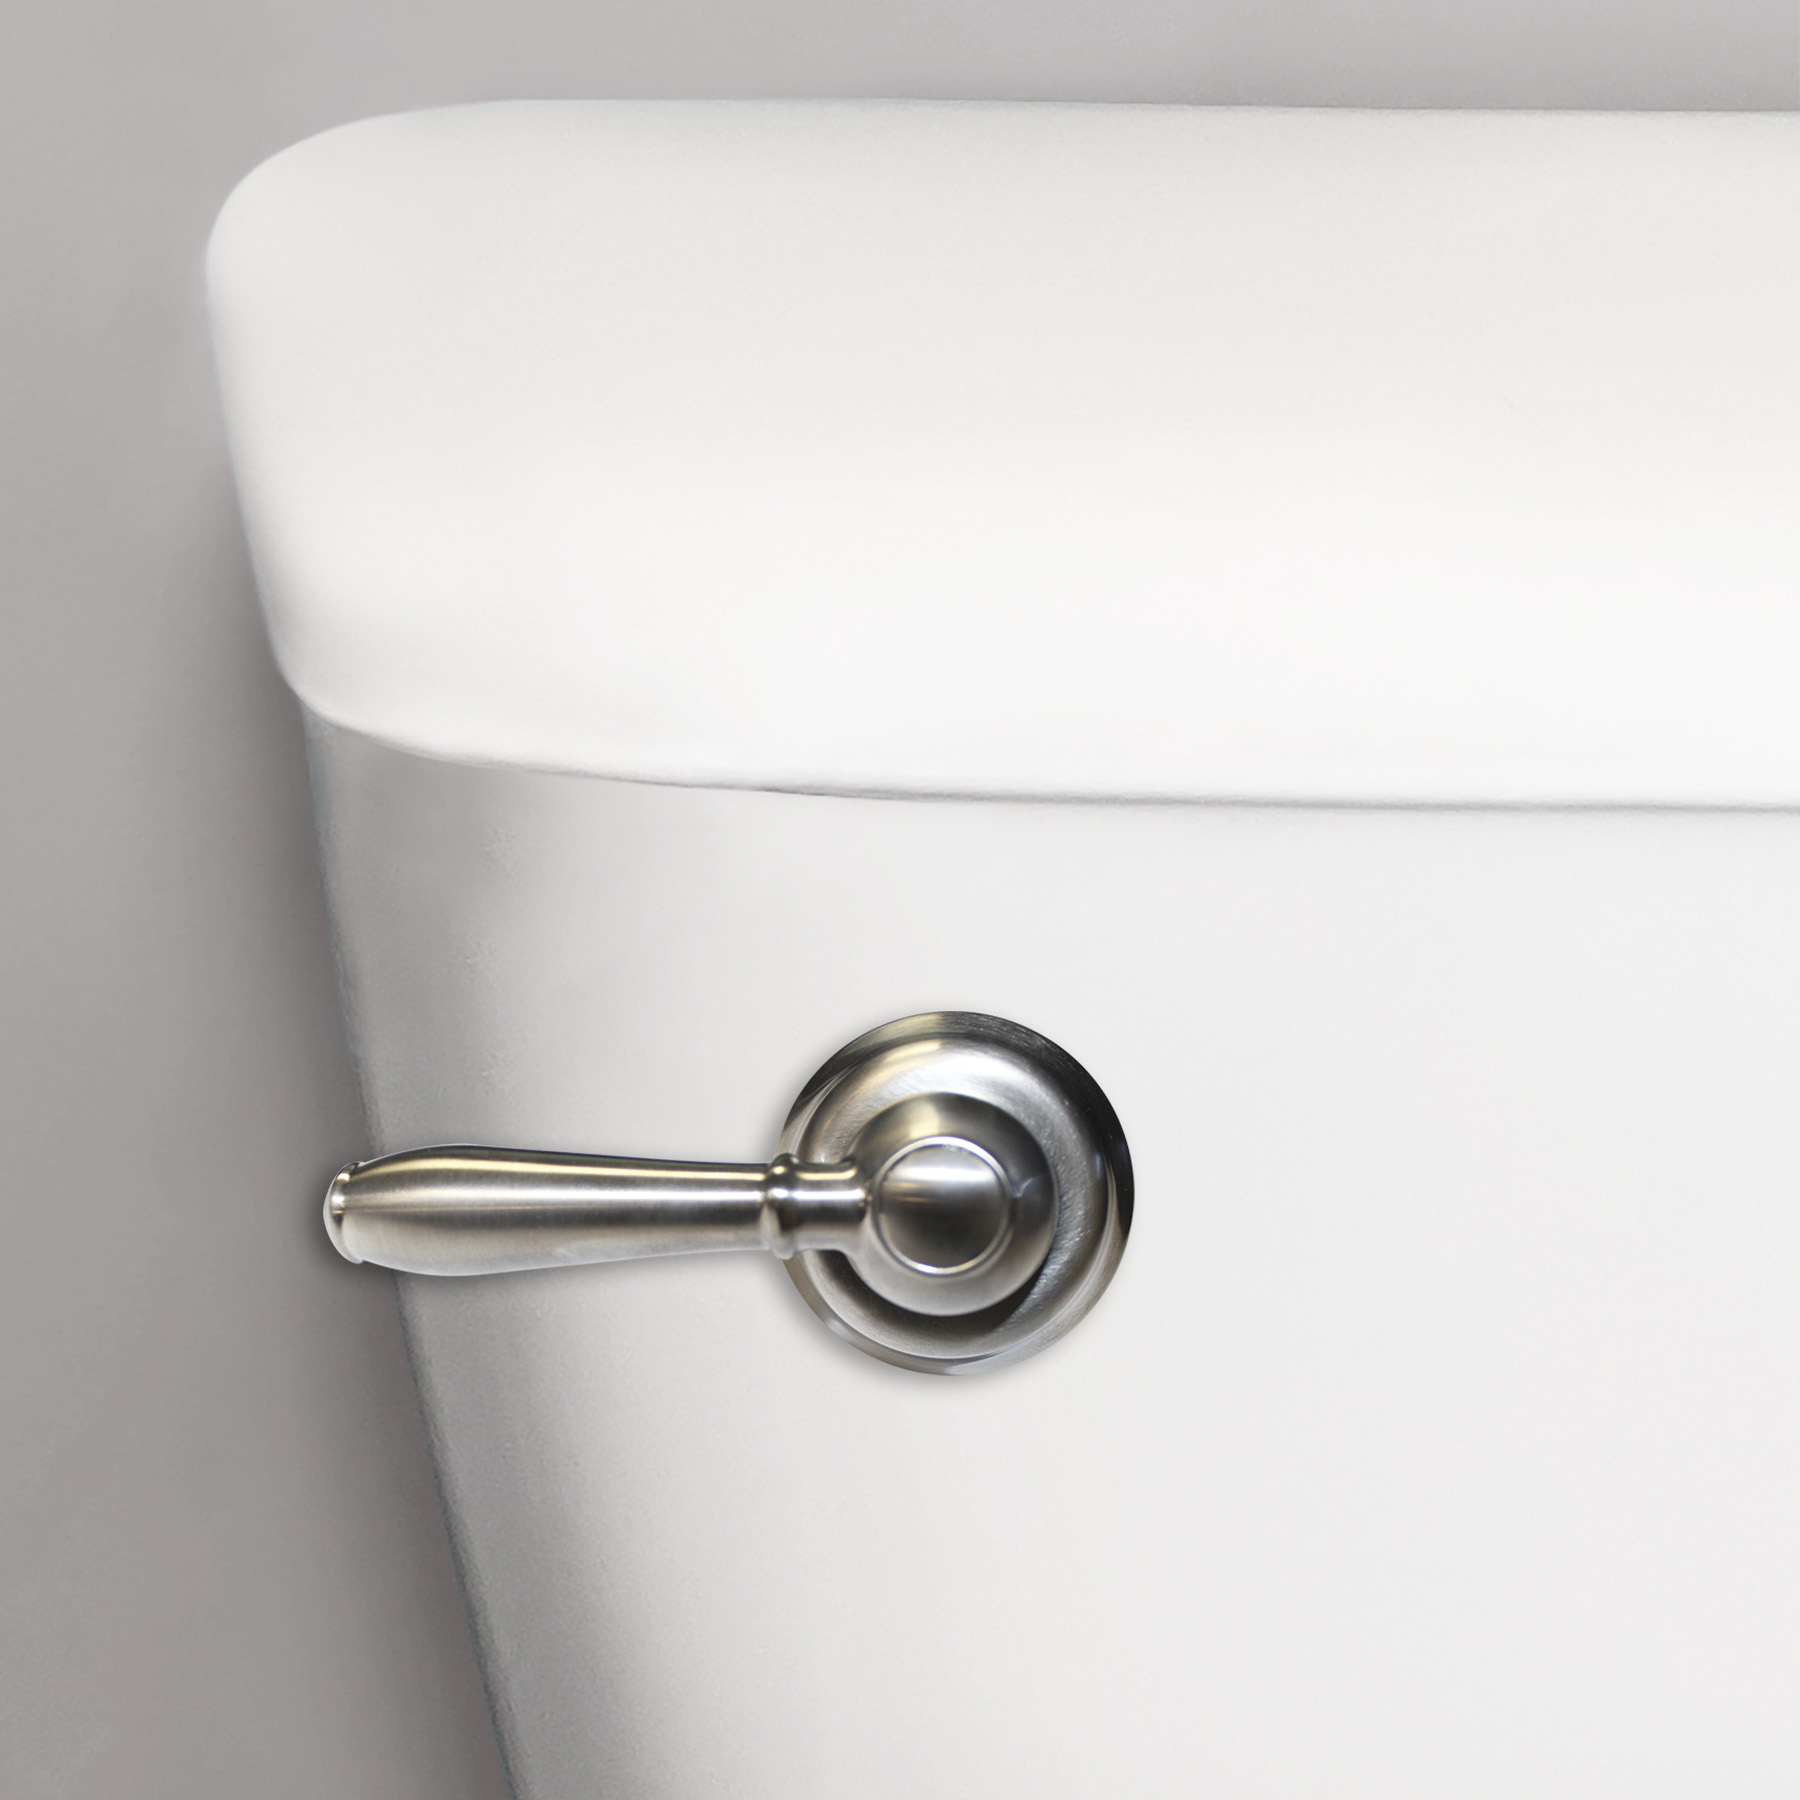 Korky faucet brushed nickel flush handle on a toilet tank